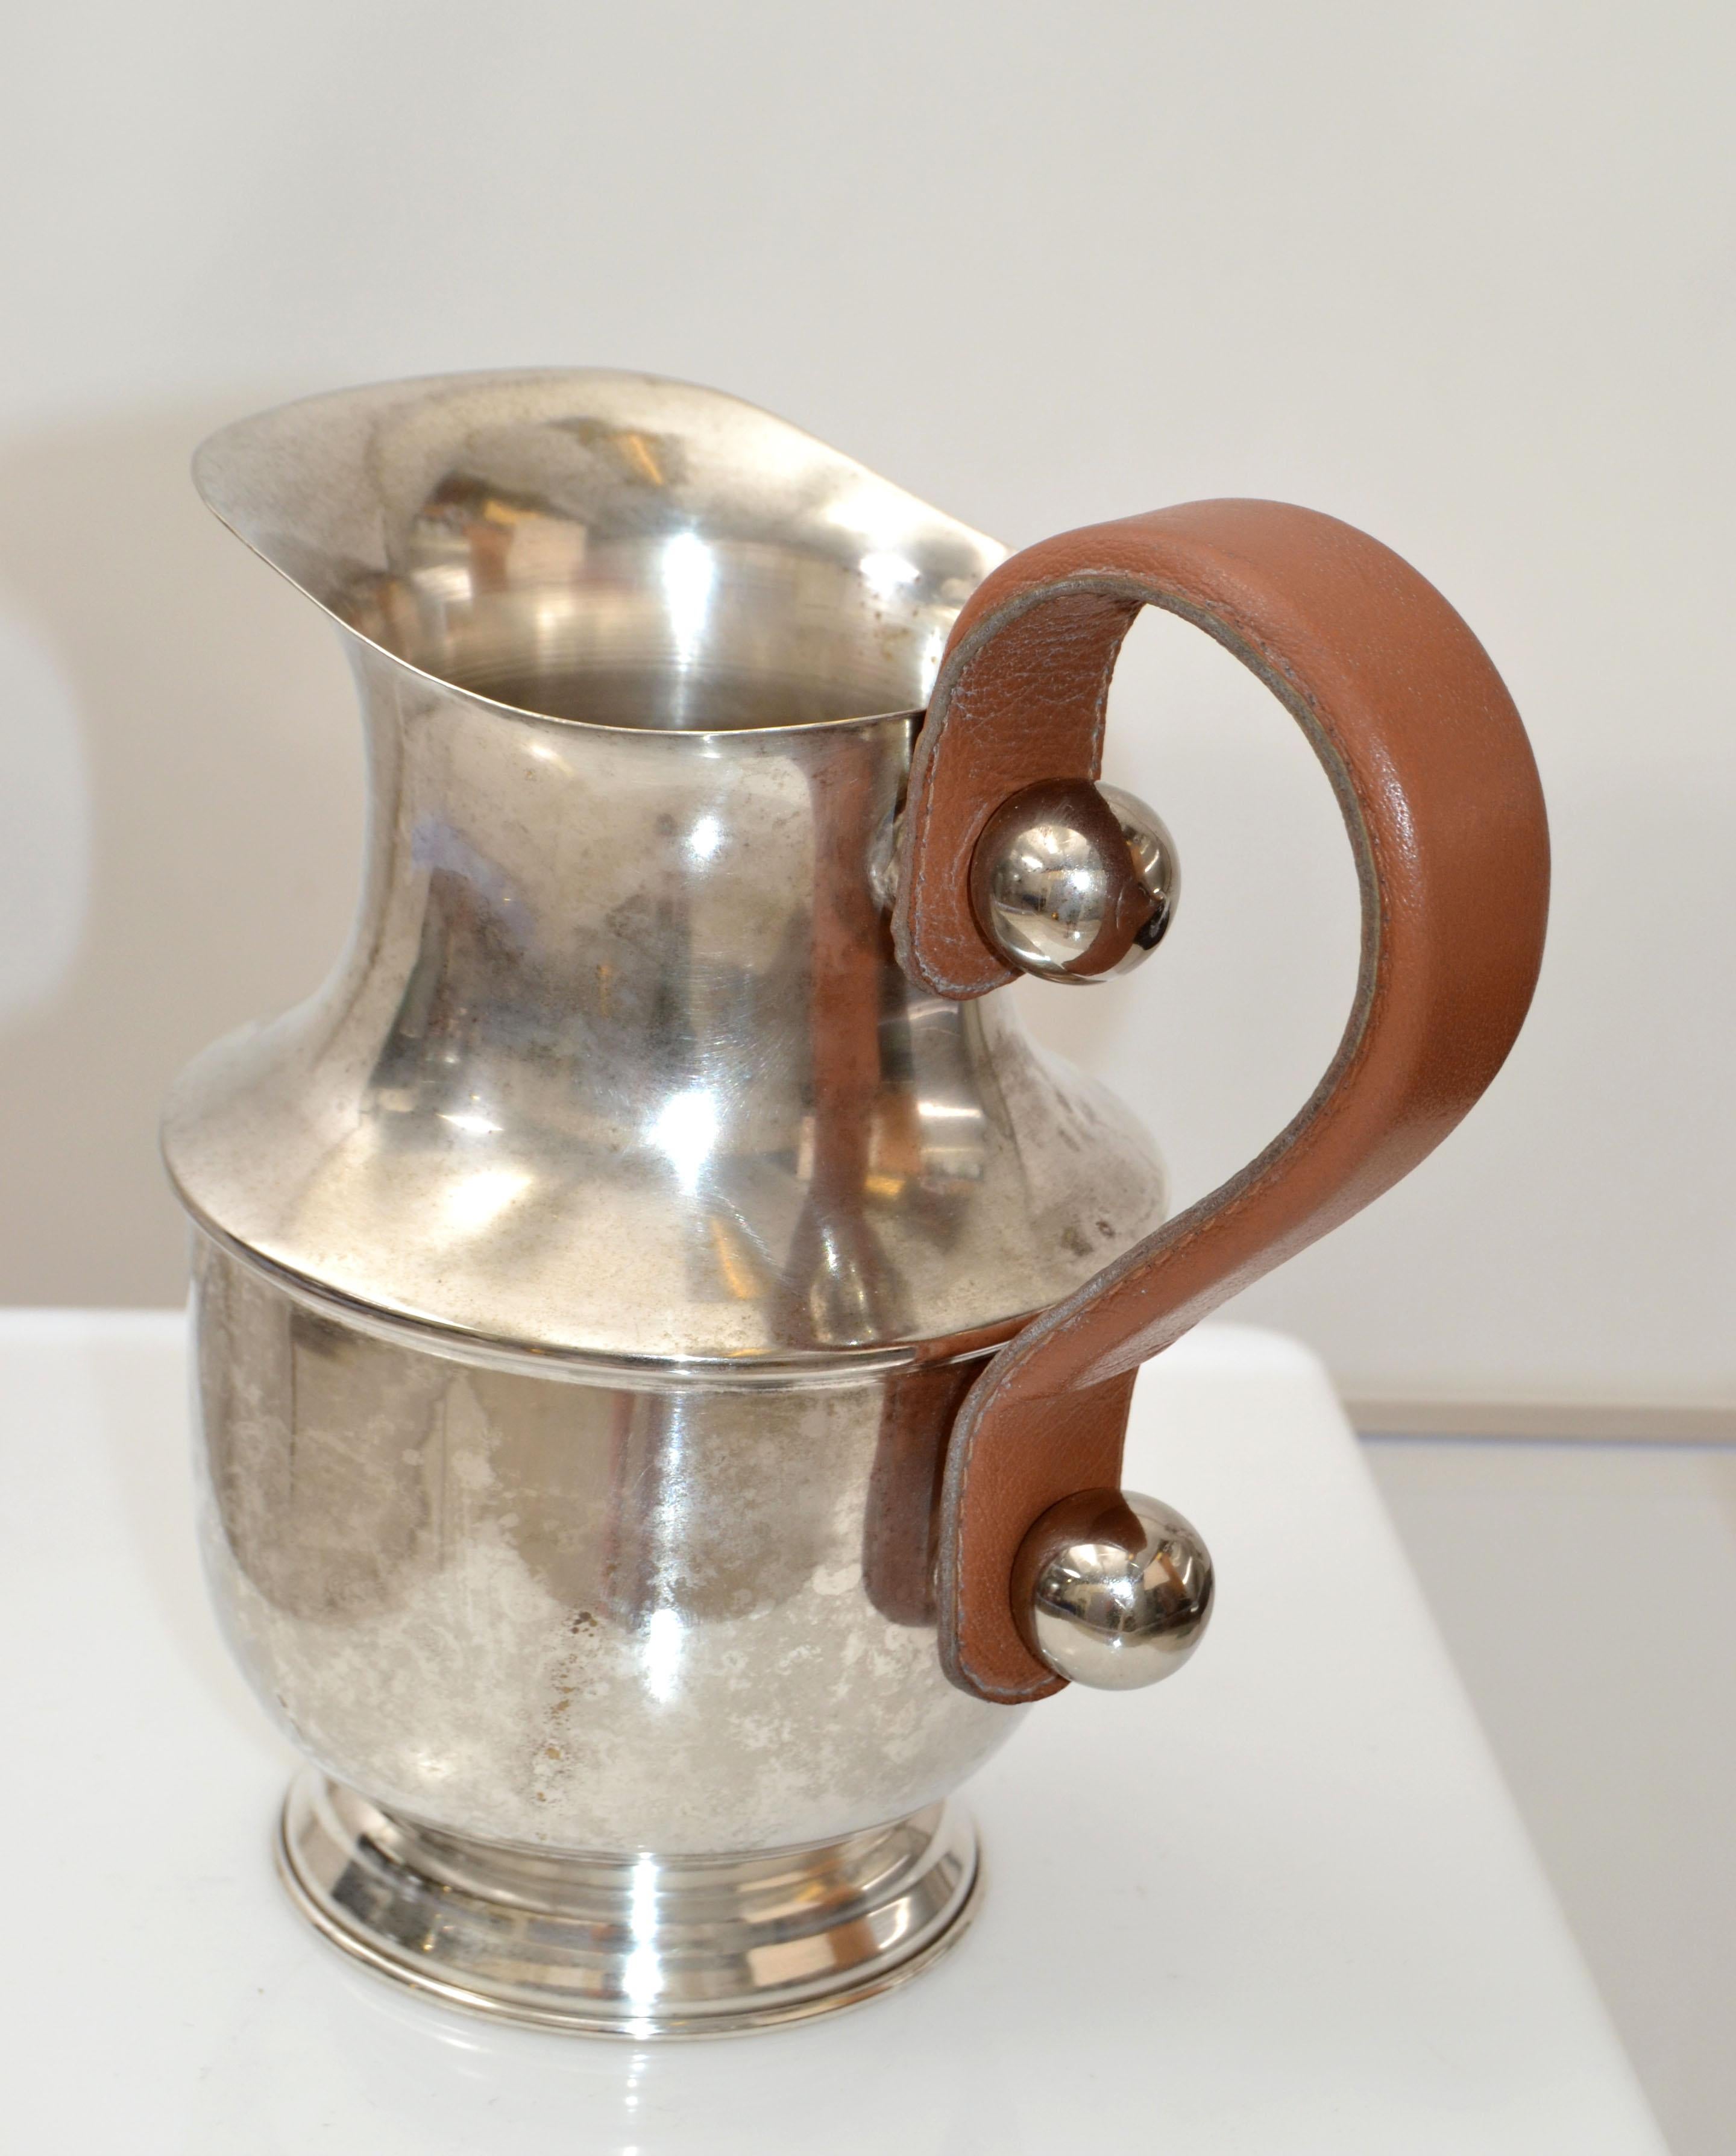 Hermès Style Mid-Century Modern Silver Plate over Nickel Decanter, Vessel Carafe 2